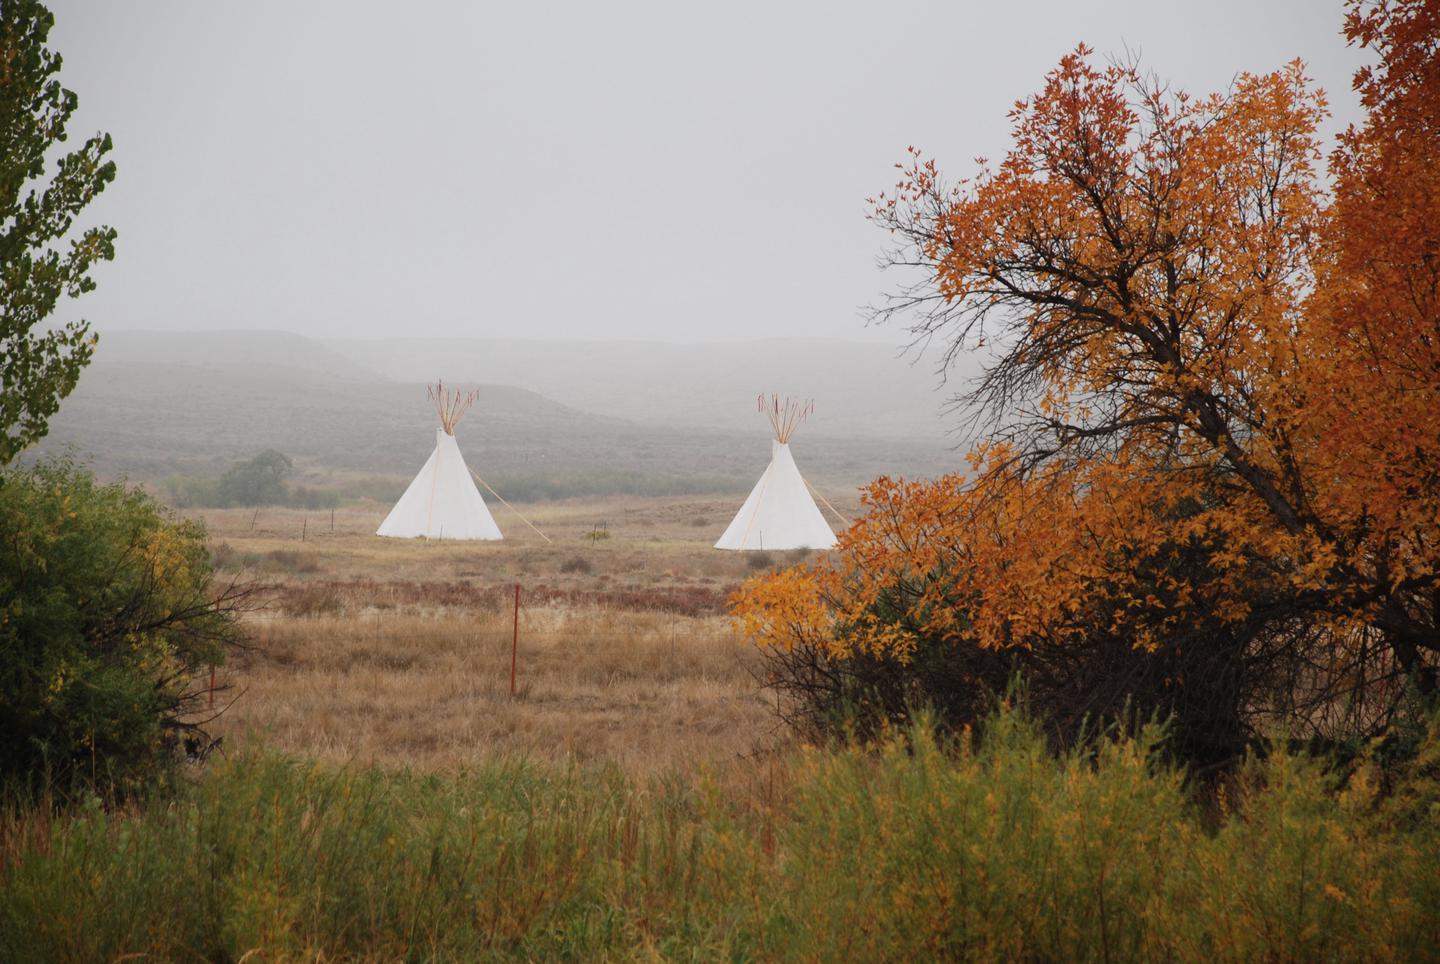 Tipis Across Laramie River in FallTipis were a common scene at Fort Laramie from 1834-1872.  At times, during treaty negotiations dozens of tipis could be found here.